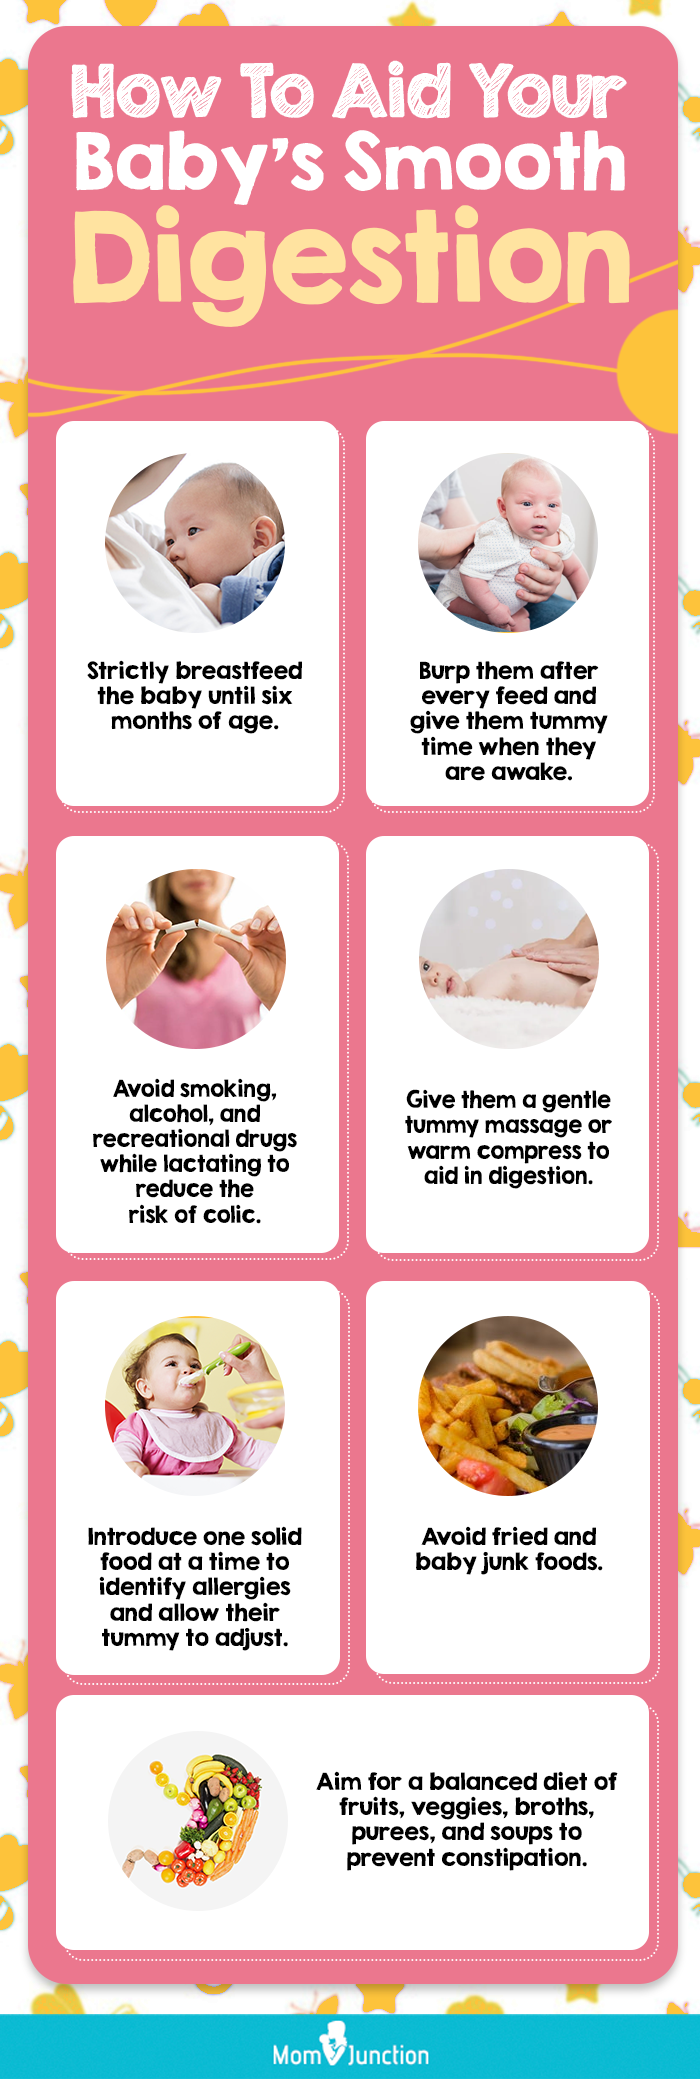 how to aid baby (infographic)